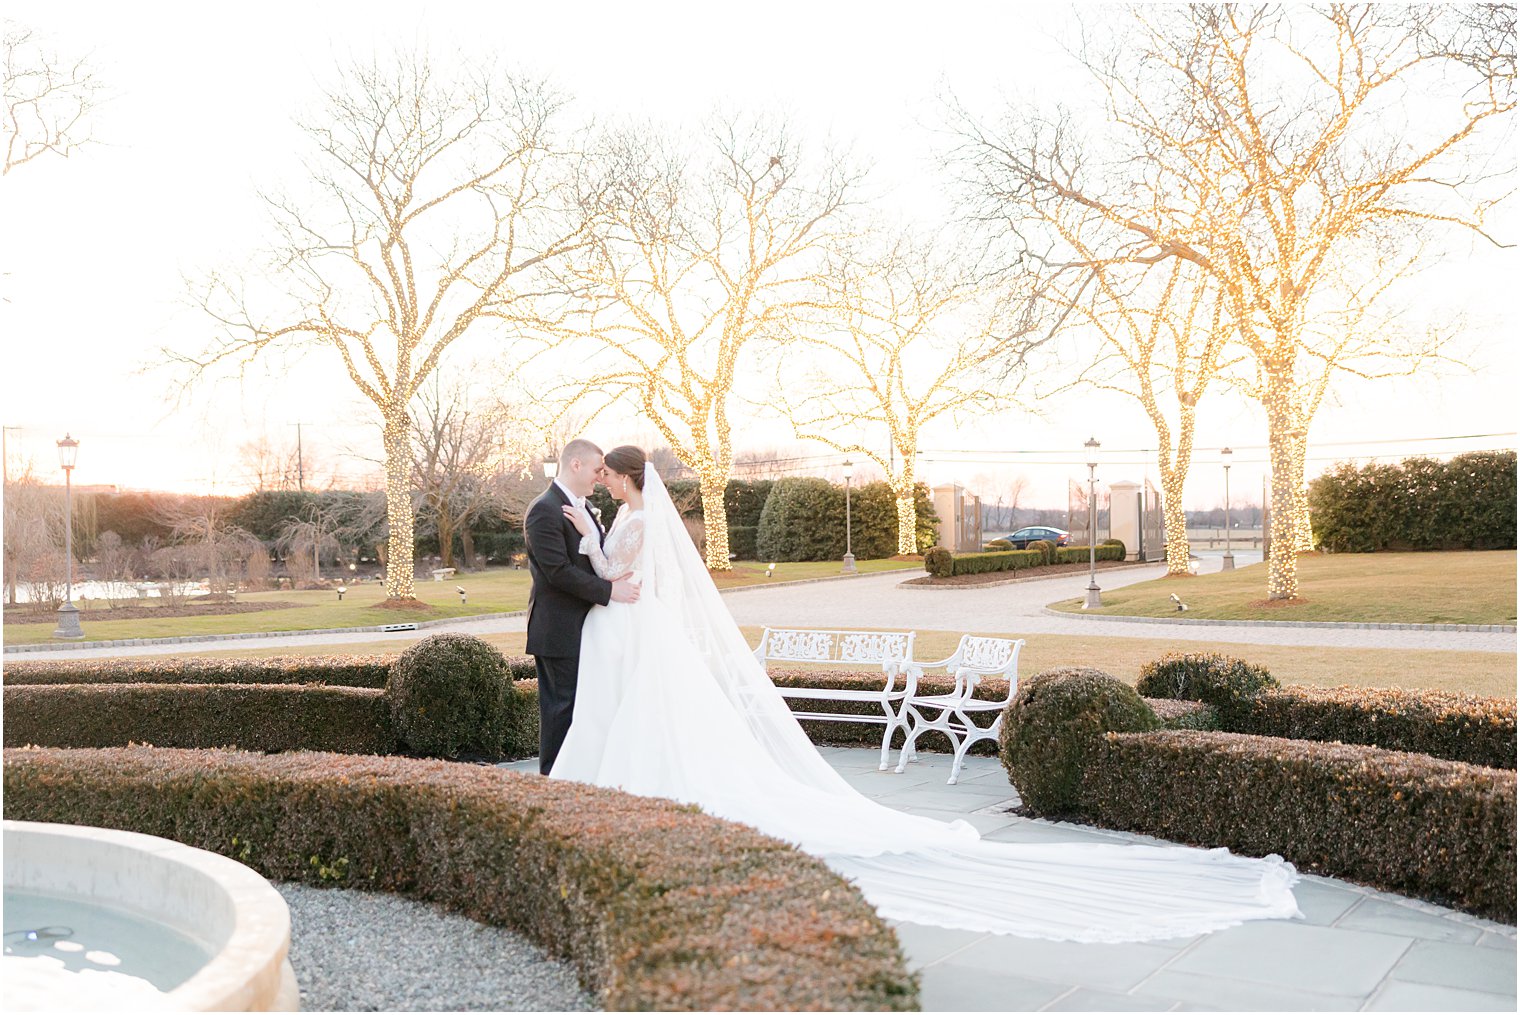 newlyweds hug in gardens at sunset outside Park Chateau Estate